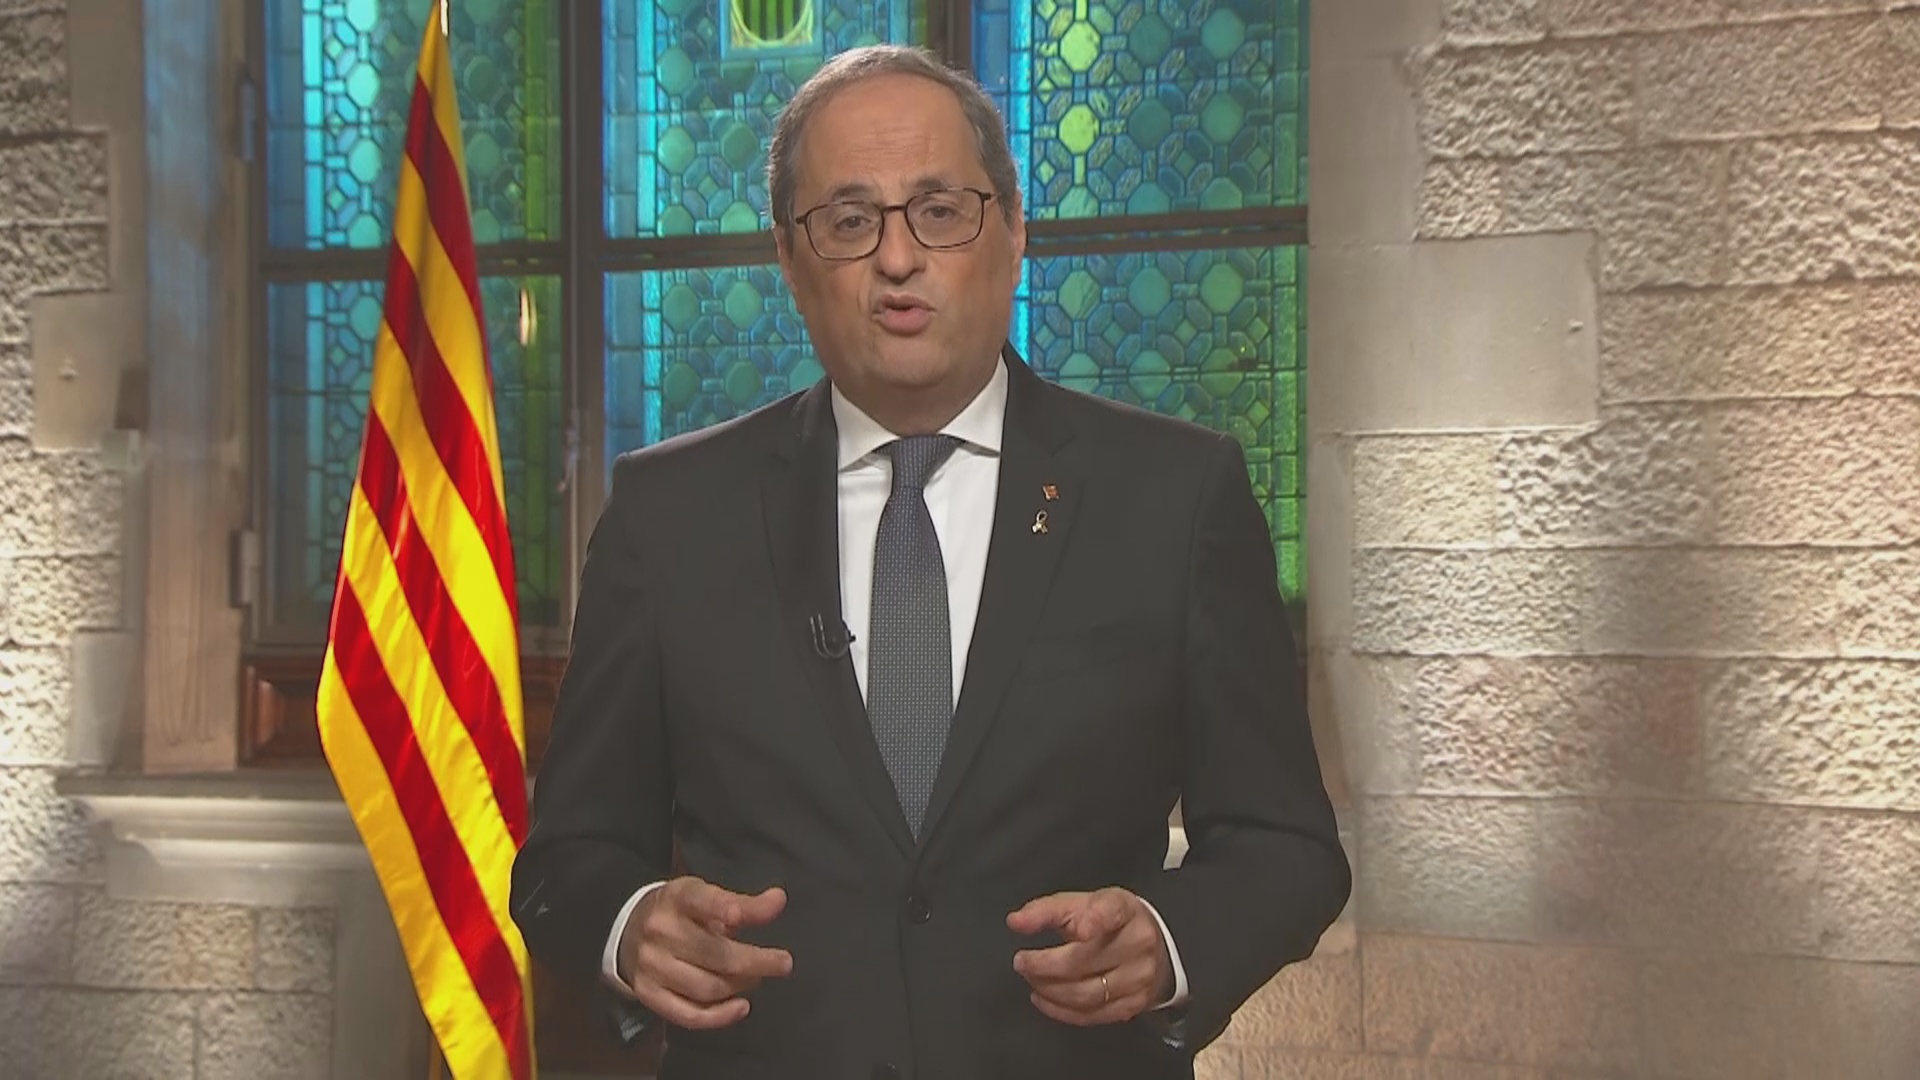 Catalan president Quim Torra during his speech for the 2020 National Day